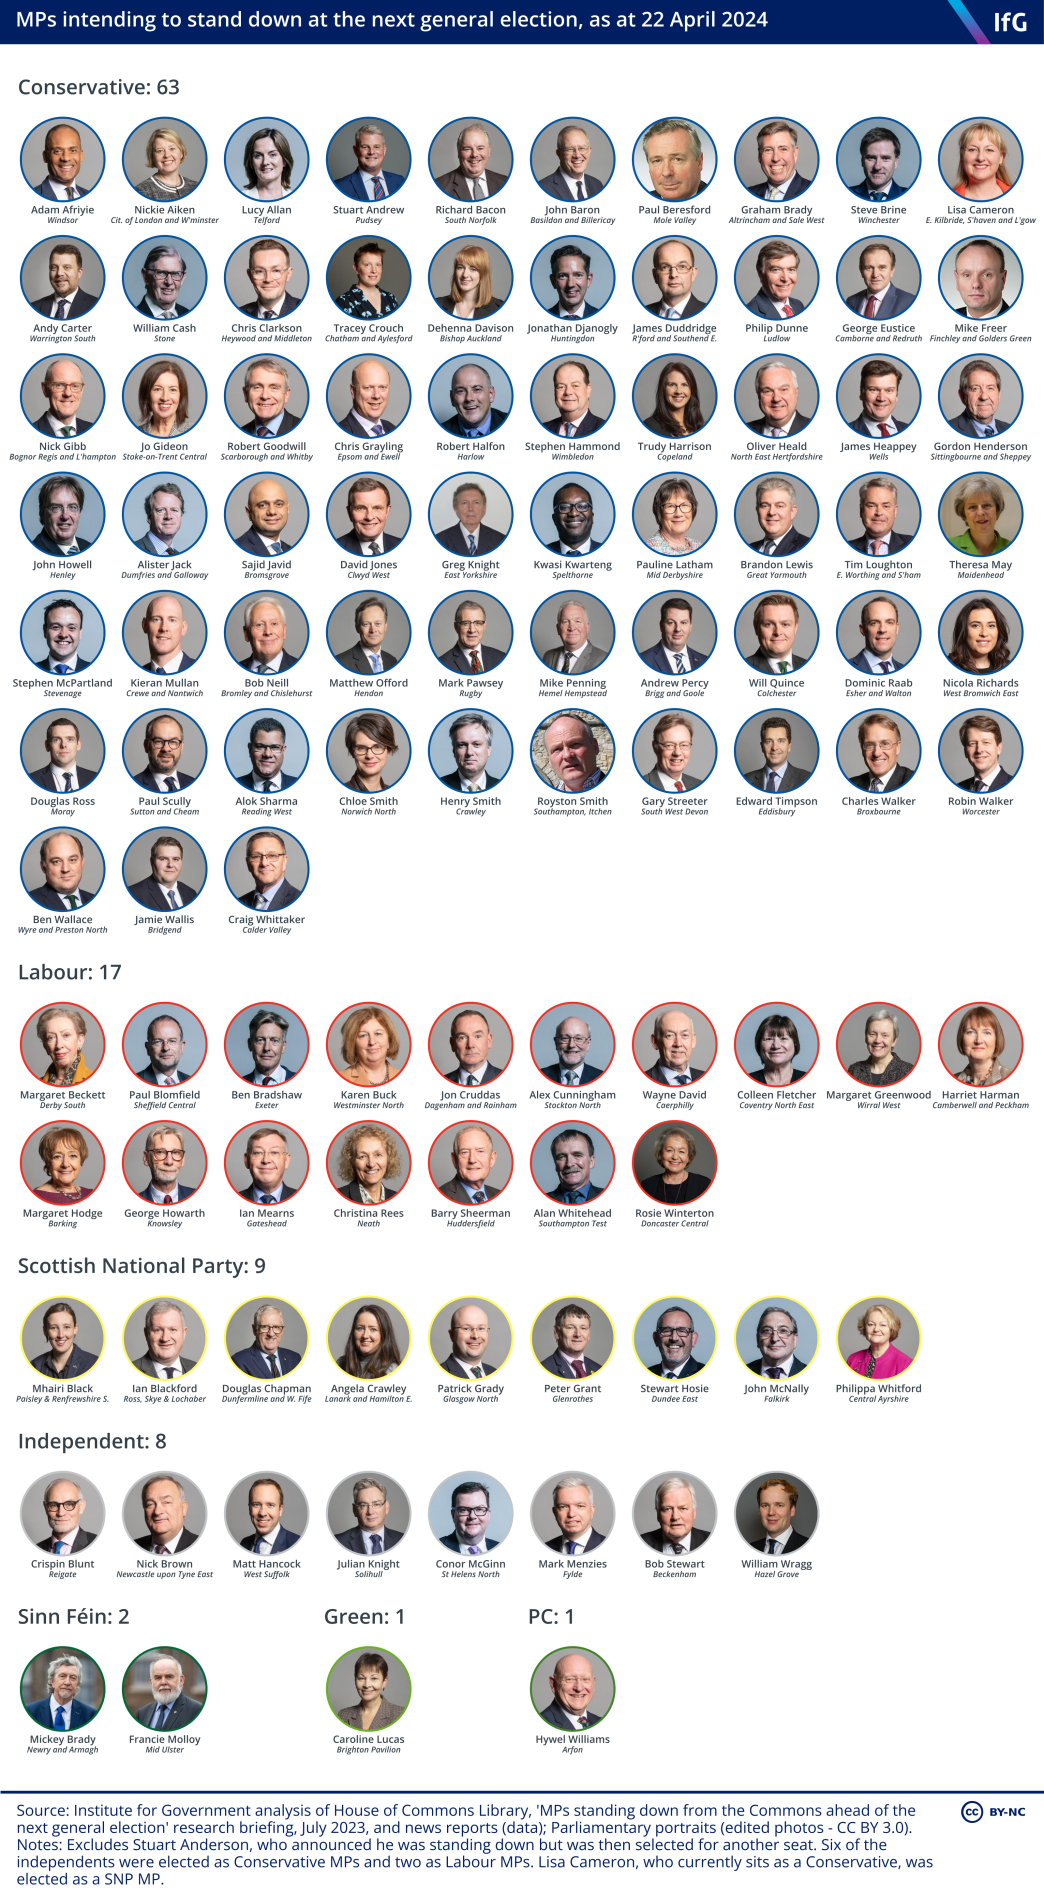 An Institute for Government graphic showing MPs intending to stand down at the next general election, as at 22 April 2024, where there are 101 MPs standing down in total, including 63 Conservative and 17 Labour MPs, and featuring people such as Theresa May, Dominic Raab and Matt Hancock.